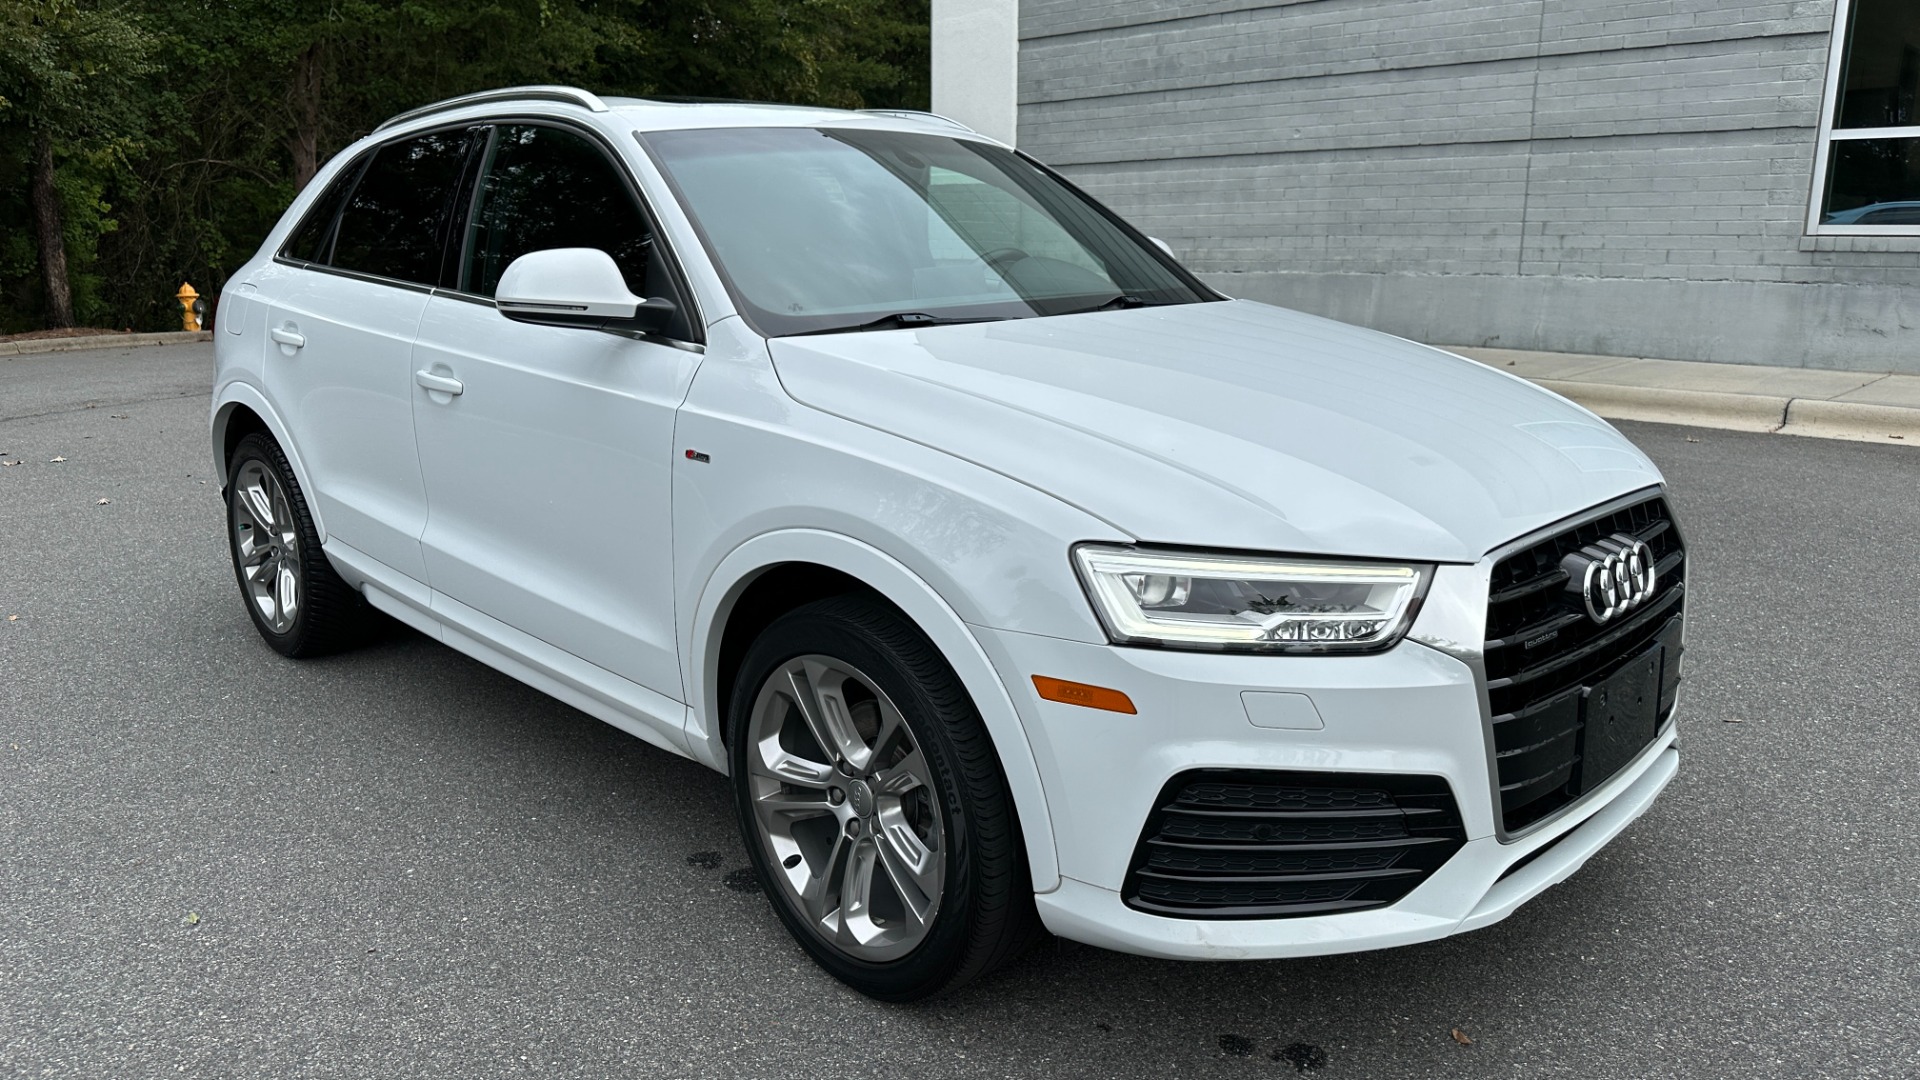 Used 2017 Audi Q3 PRESTIGE / PANORAMIC ROOF / NAV / HEATED SEATS for sale $22,795 at Formula Imports in Charlotte NC 28227 5